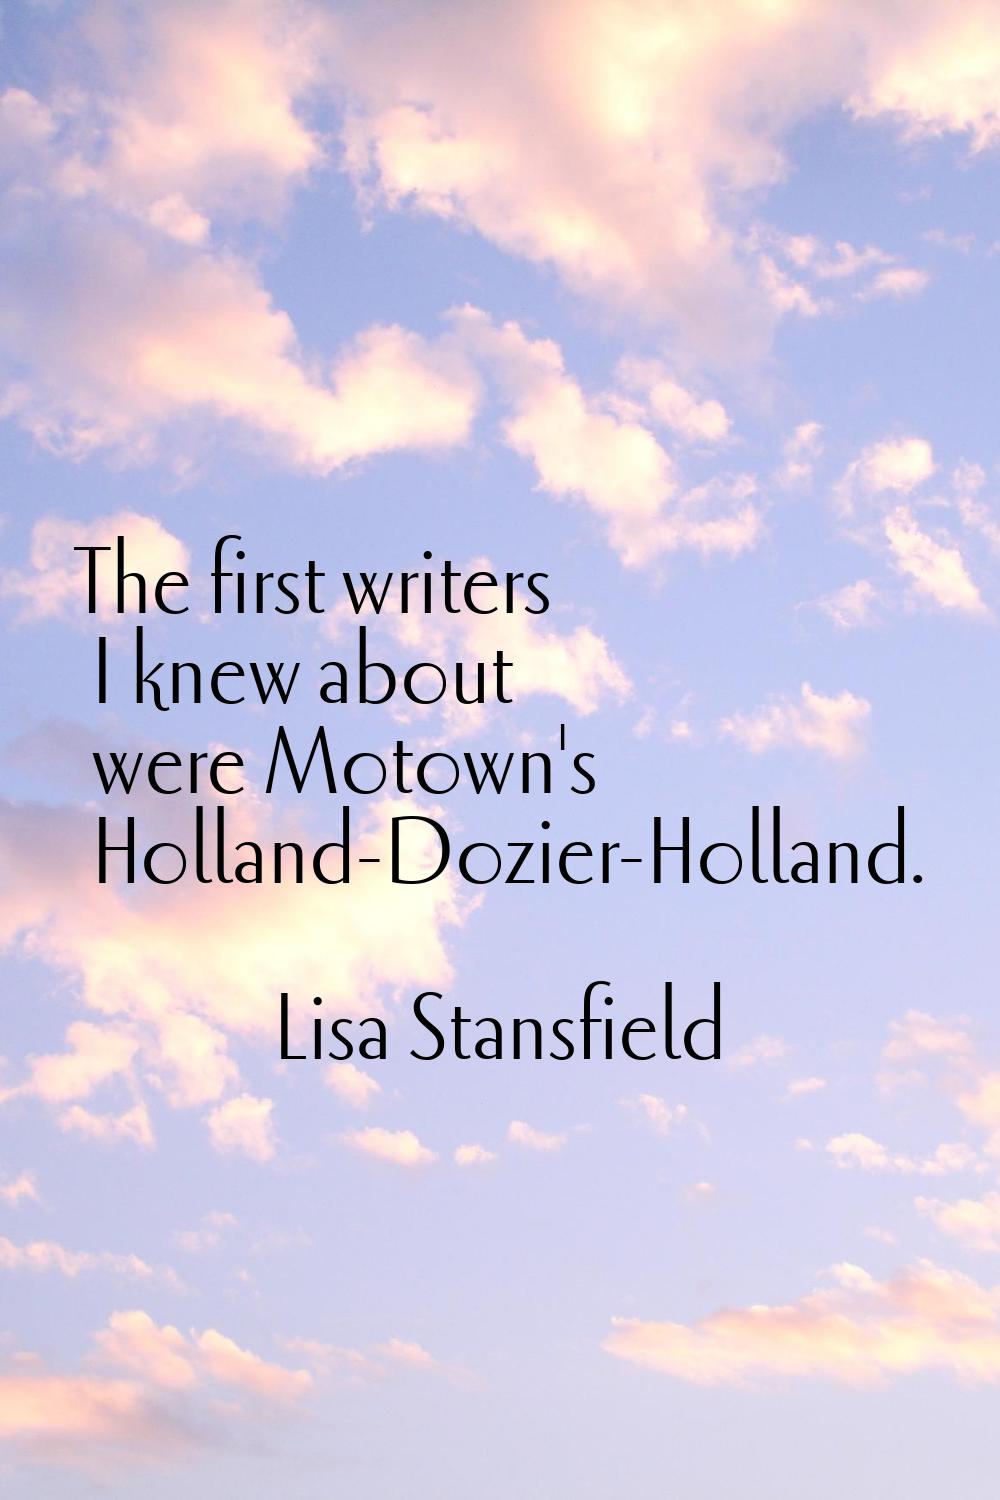 The first writers I knew about were Motown's Holland-Dozier-Holland.